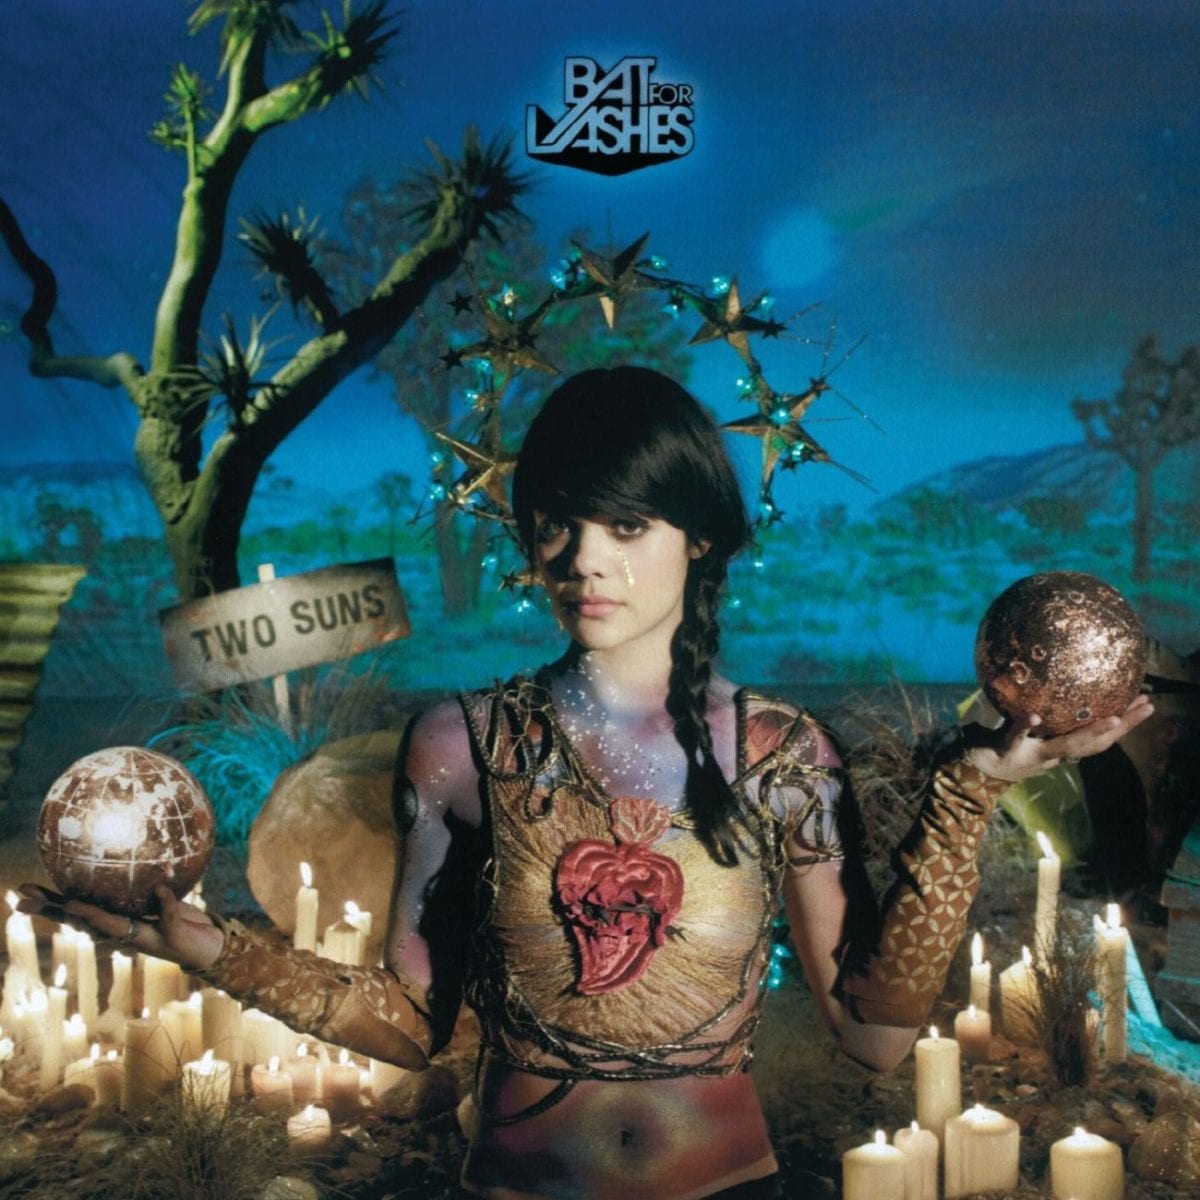 Review: Bat For Lashes: Two Suns - Inverted Audio